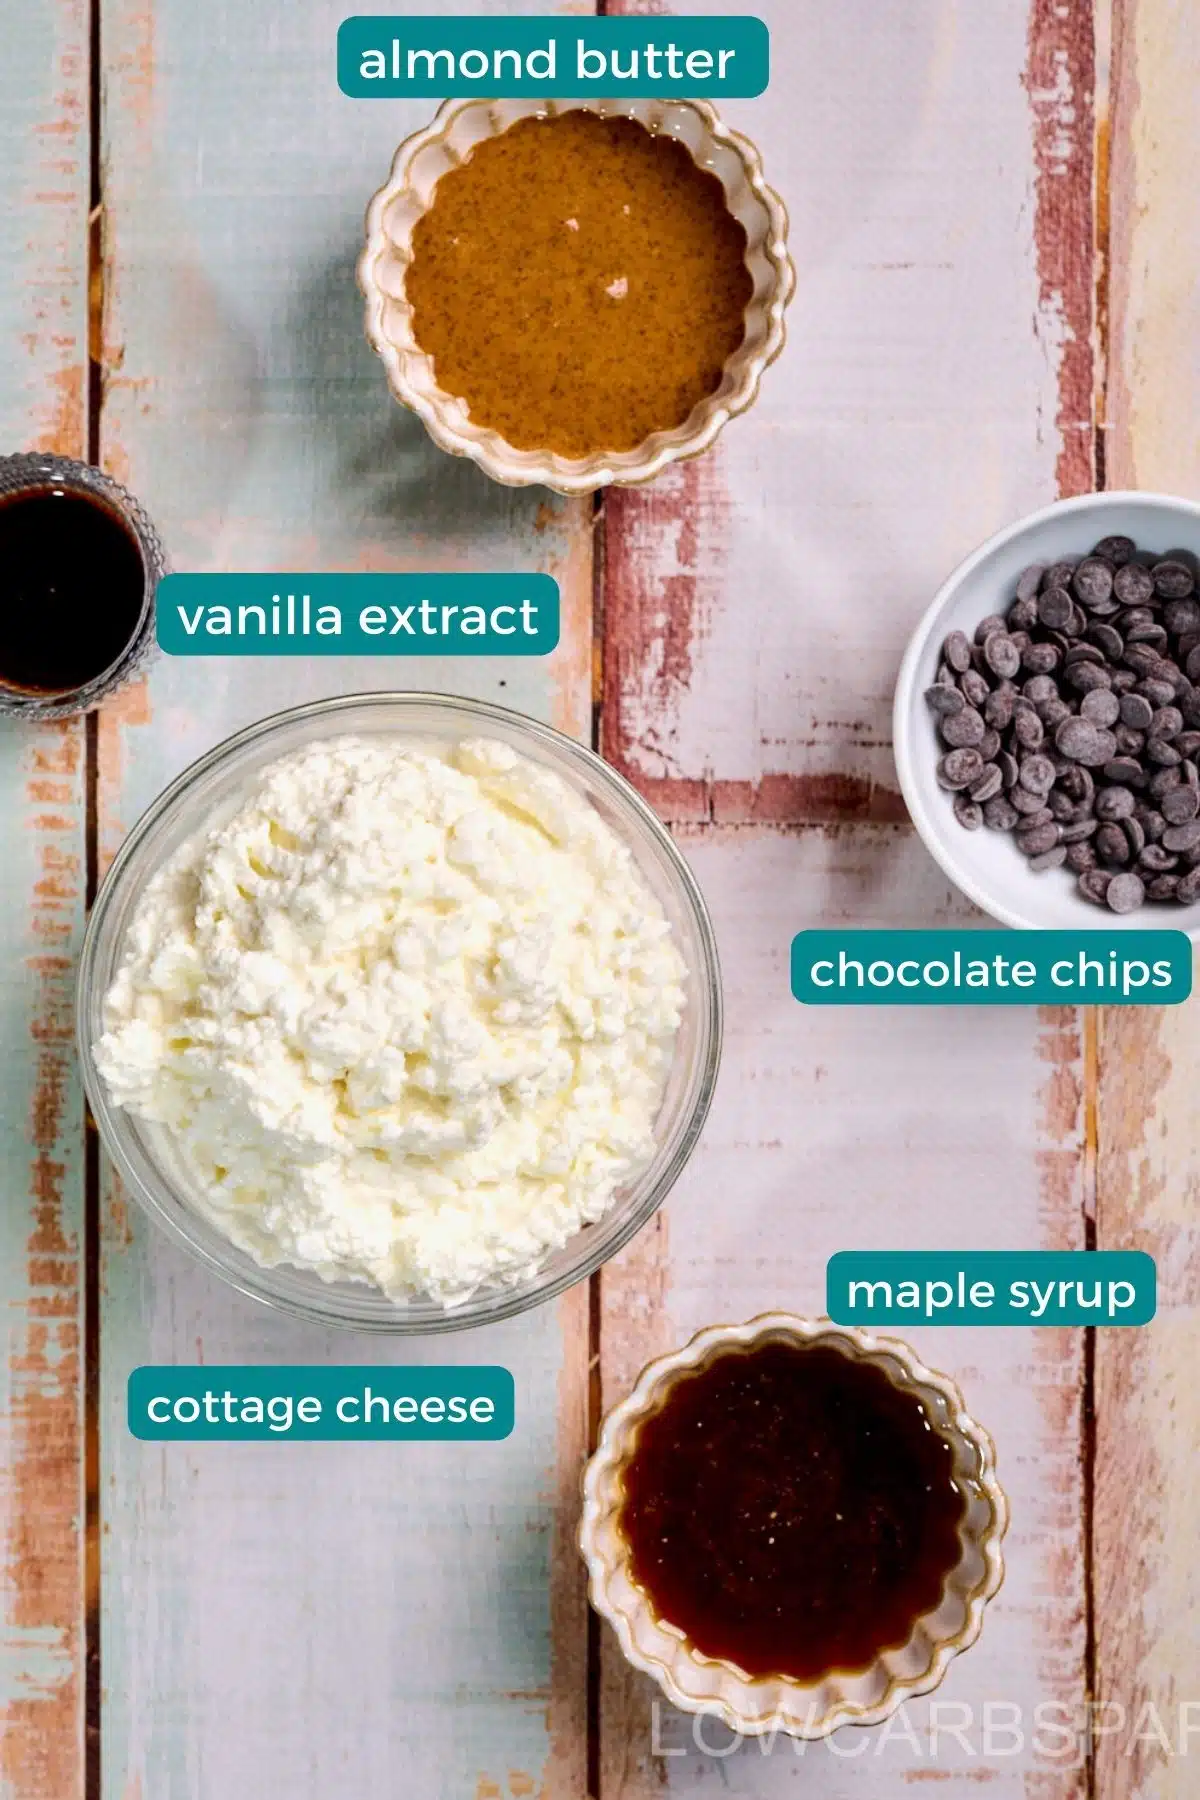 Cottage cheese ice cream ingredients